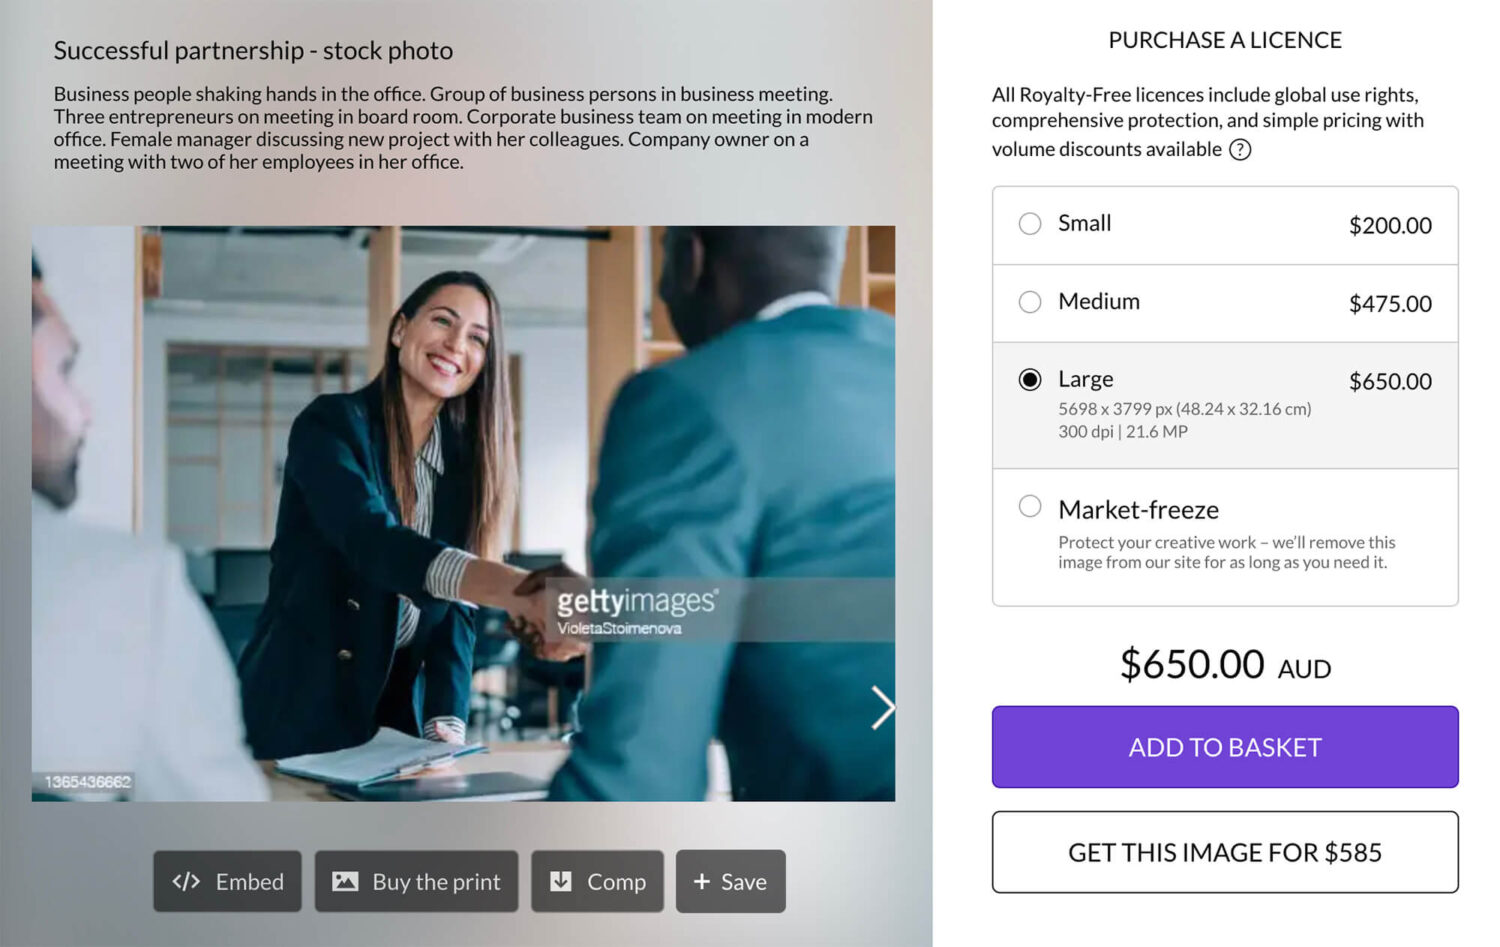 Example of stock photography and pricing.